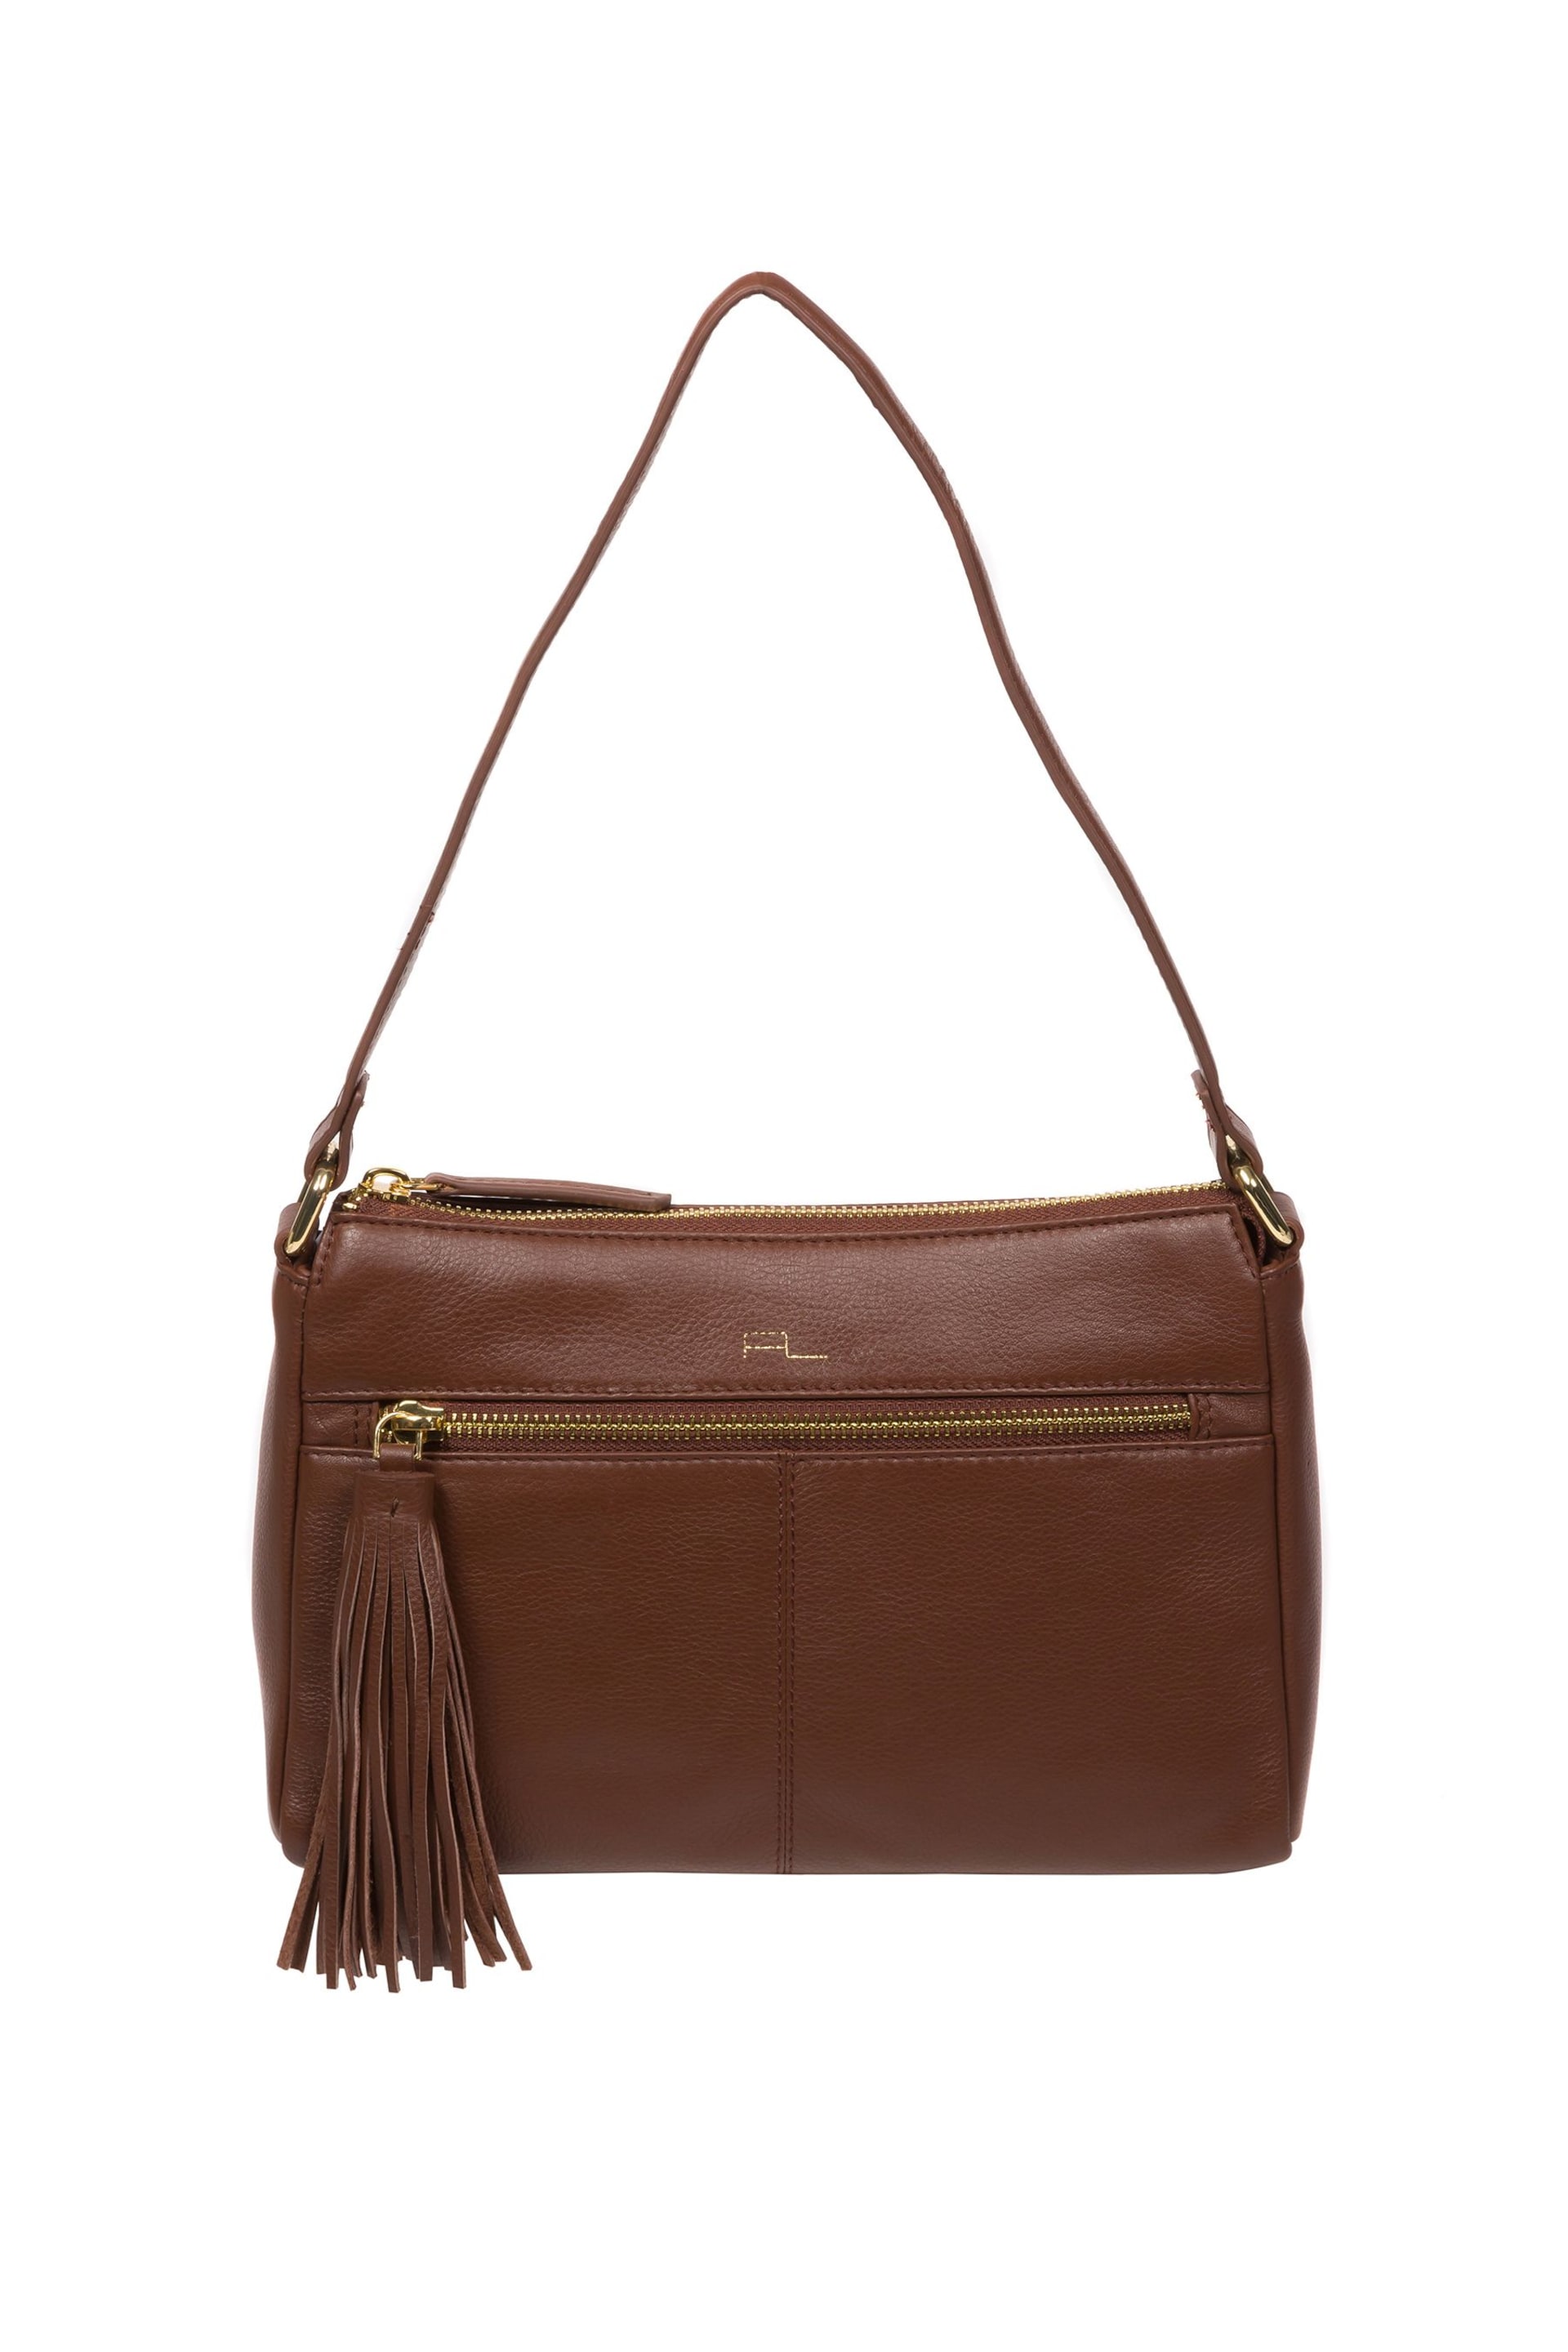 Pure Luxuries London Isabella Nappa Leather Grab Bag - Image 1 of 6